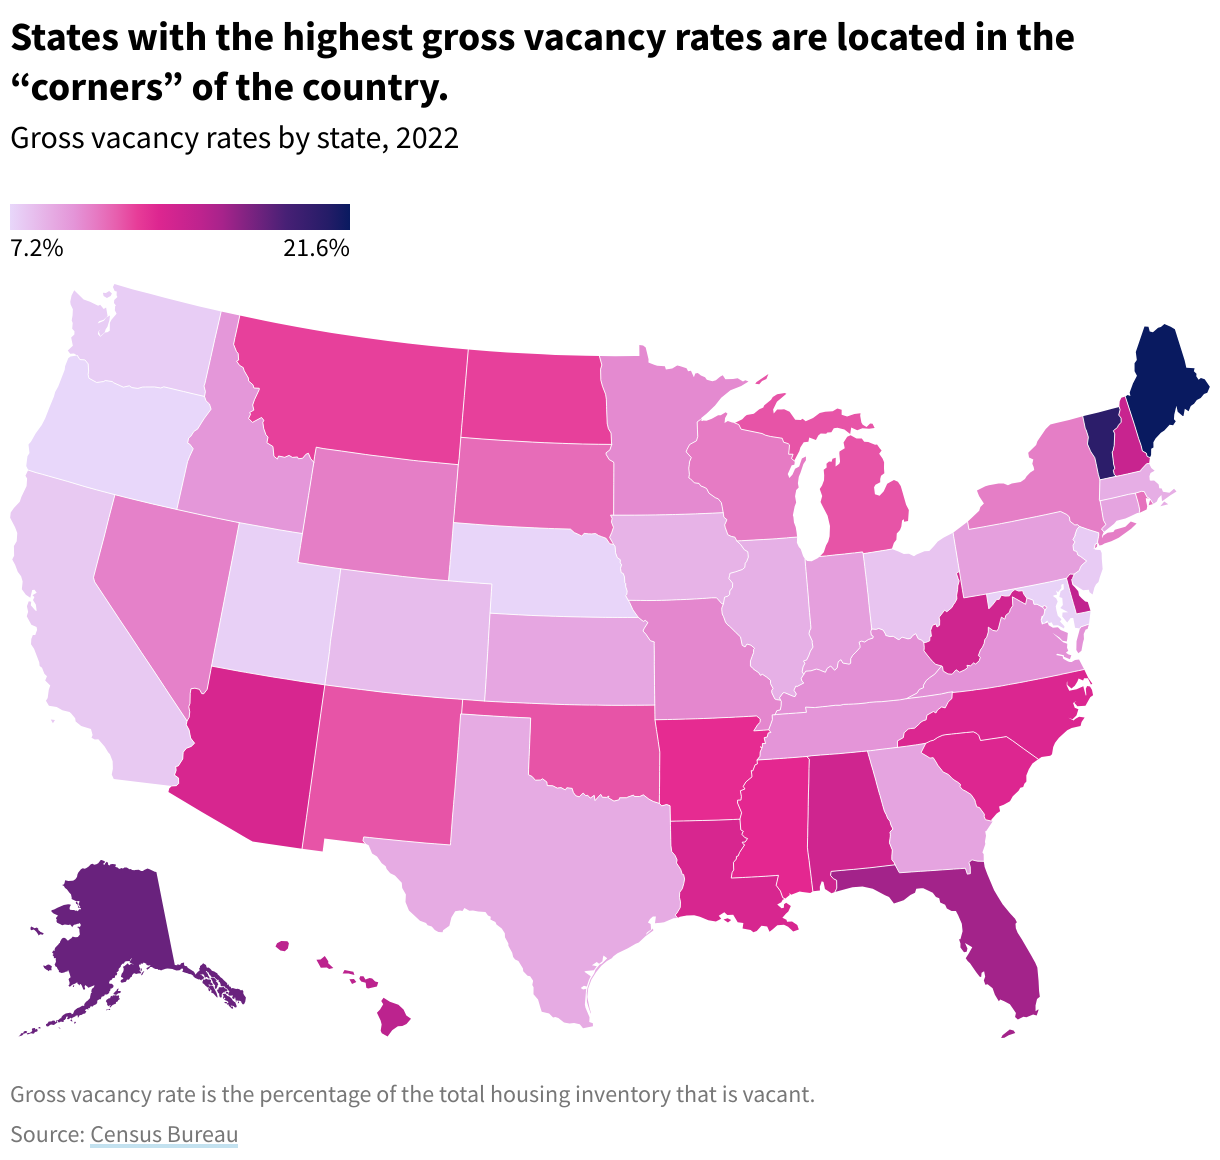 Map of the US showing the gross vacancy rate by state.